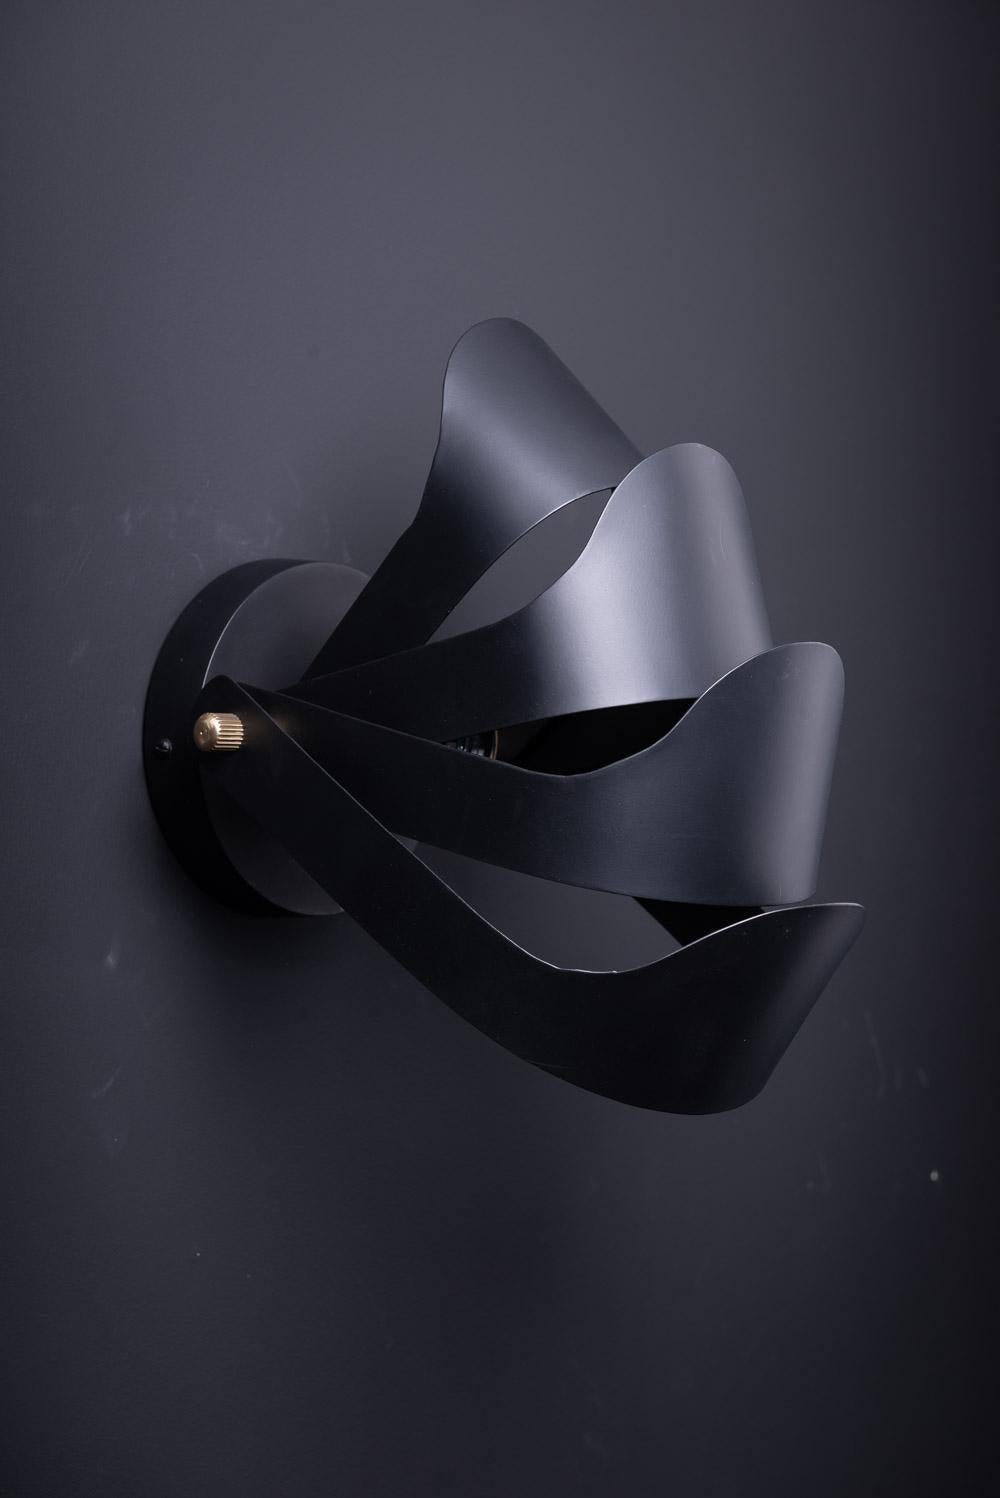 Black metal and modular wall light, elegant, presence and class. Sleek design, midcentury style, you can direct the flood of light according to your wishes. New item, never used.